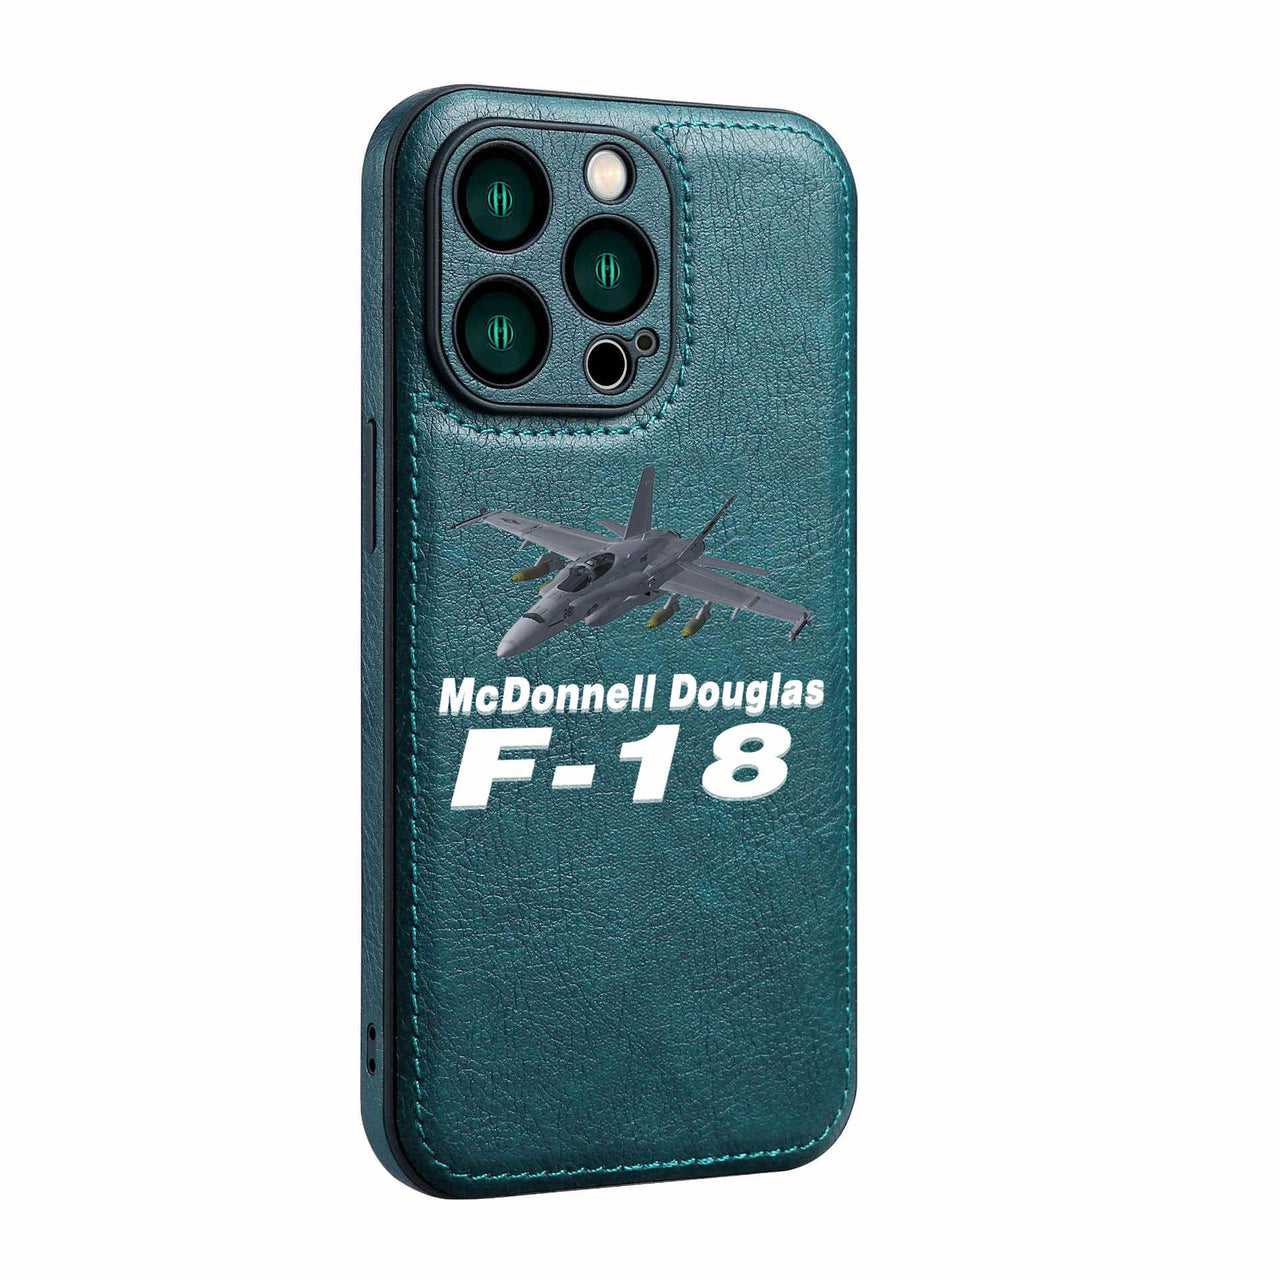 The McDonnell Douglas F18 Designed Leather iPhone Cases